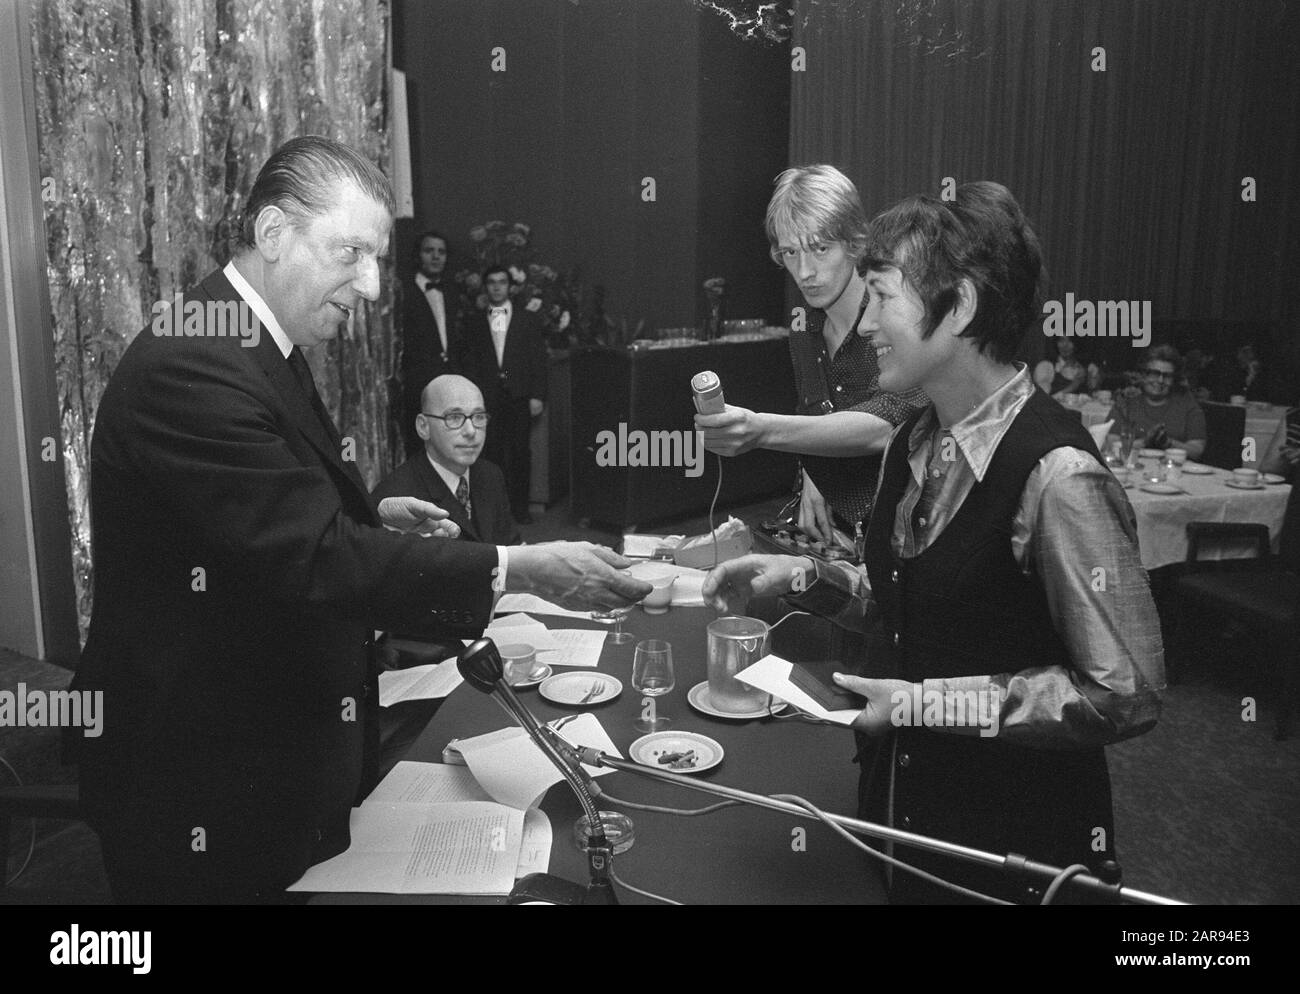 Award of the Dutch Journalism of the Lucas-Oomsfonds in hotel Hilton in Amsterdam, widow of Godfried Bomans receives prize from Mr. Lucas Annotation: Godfried Bomans received postheem an award for his article 'In het hart van Engeland' in the magazine Avenue Datate: 8 December 1972 Location: Amsterdam, Noord-Holland Keywords: awards Stock Photo